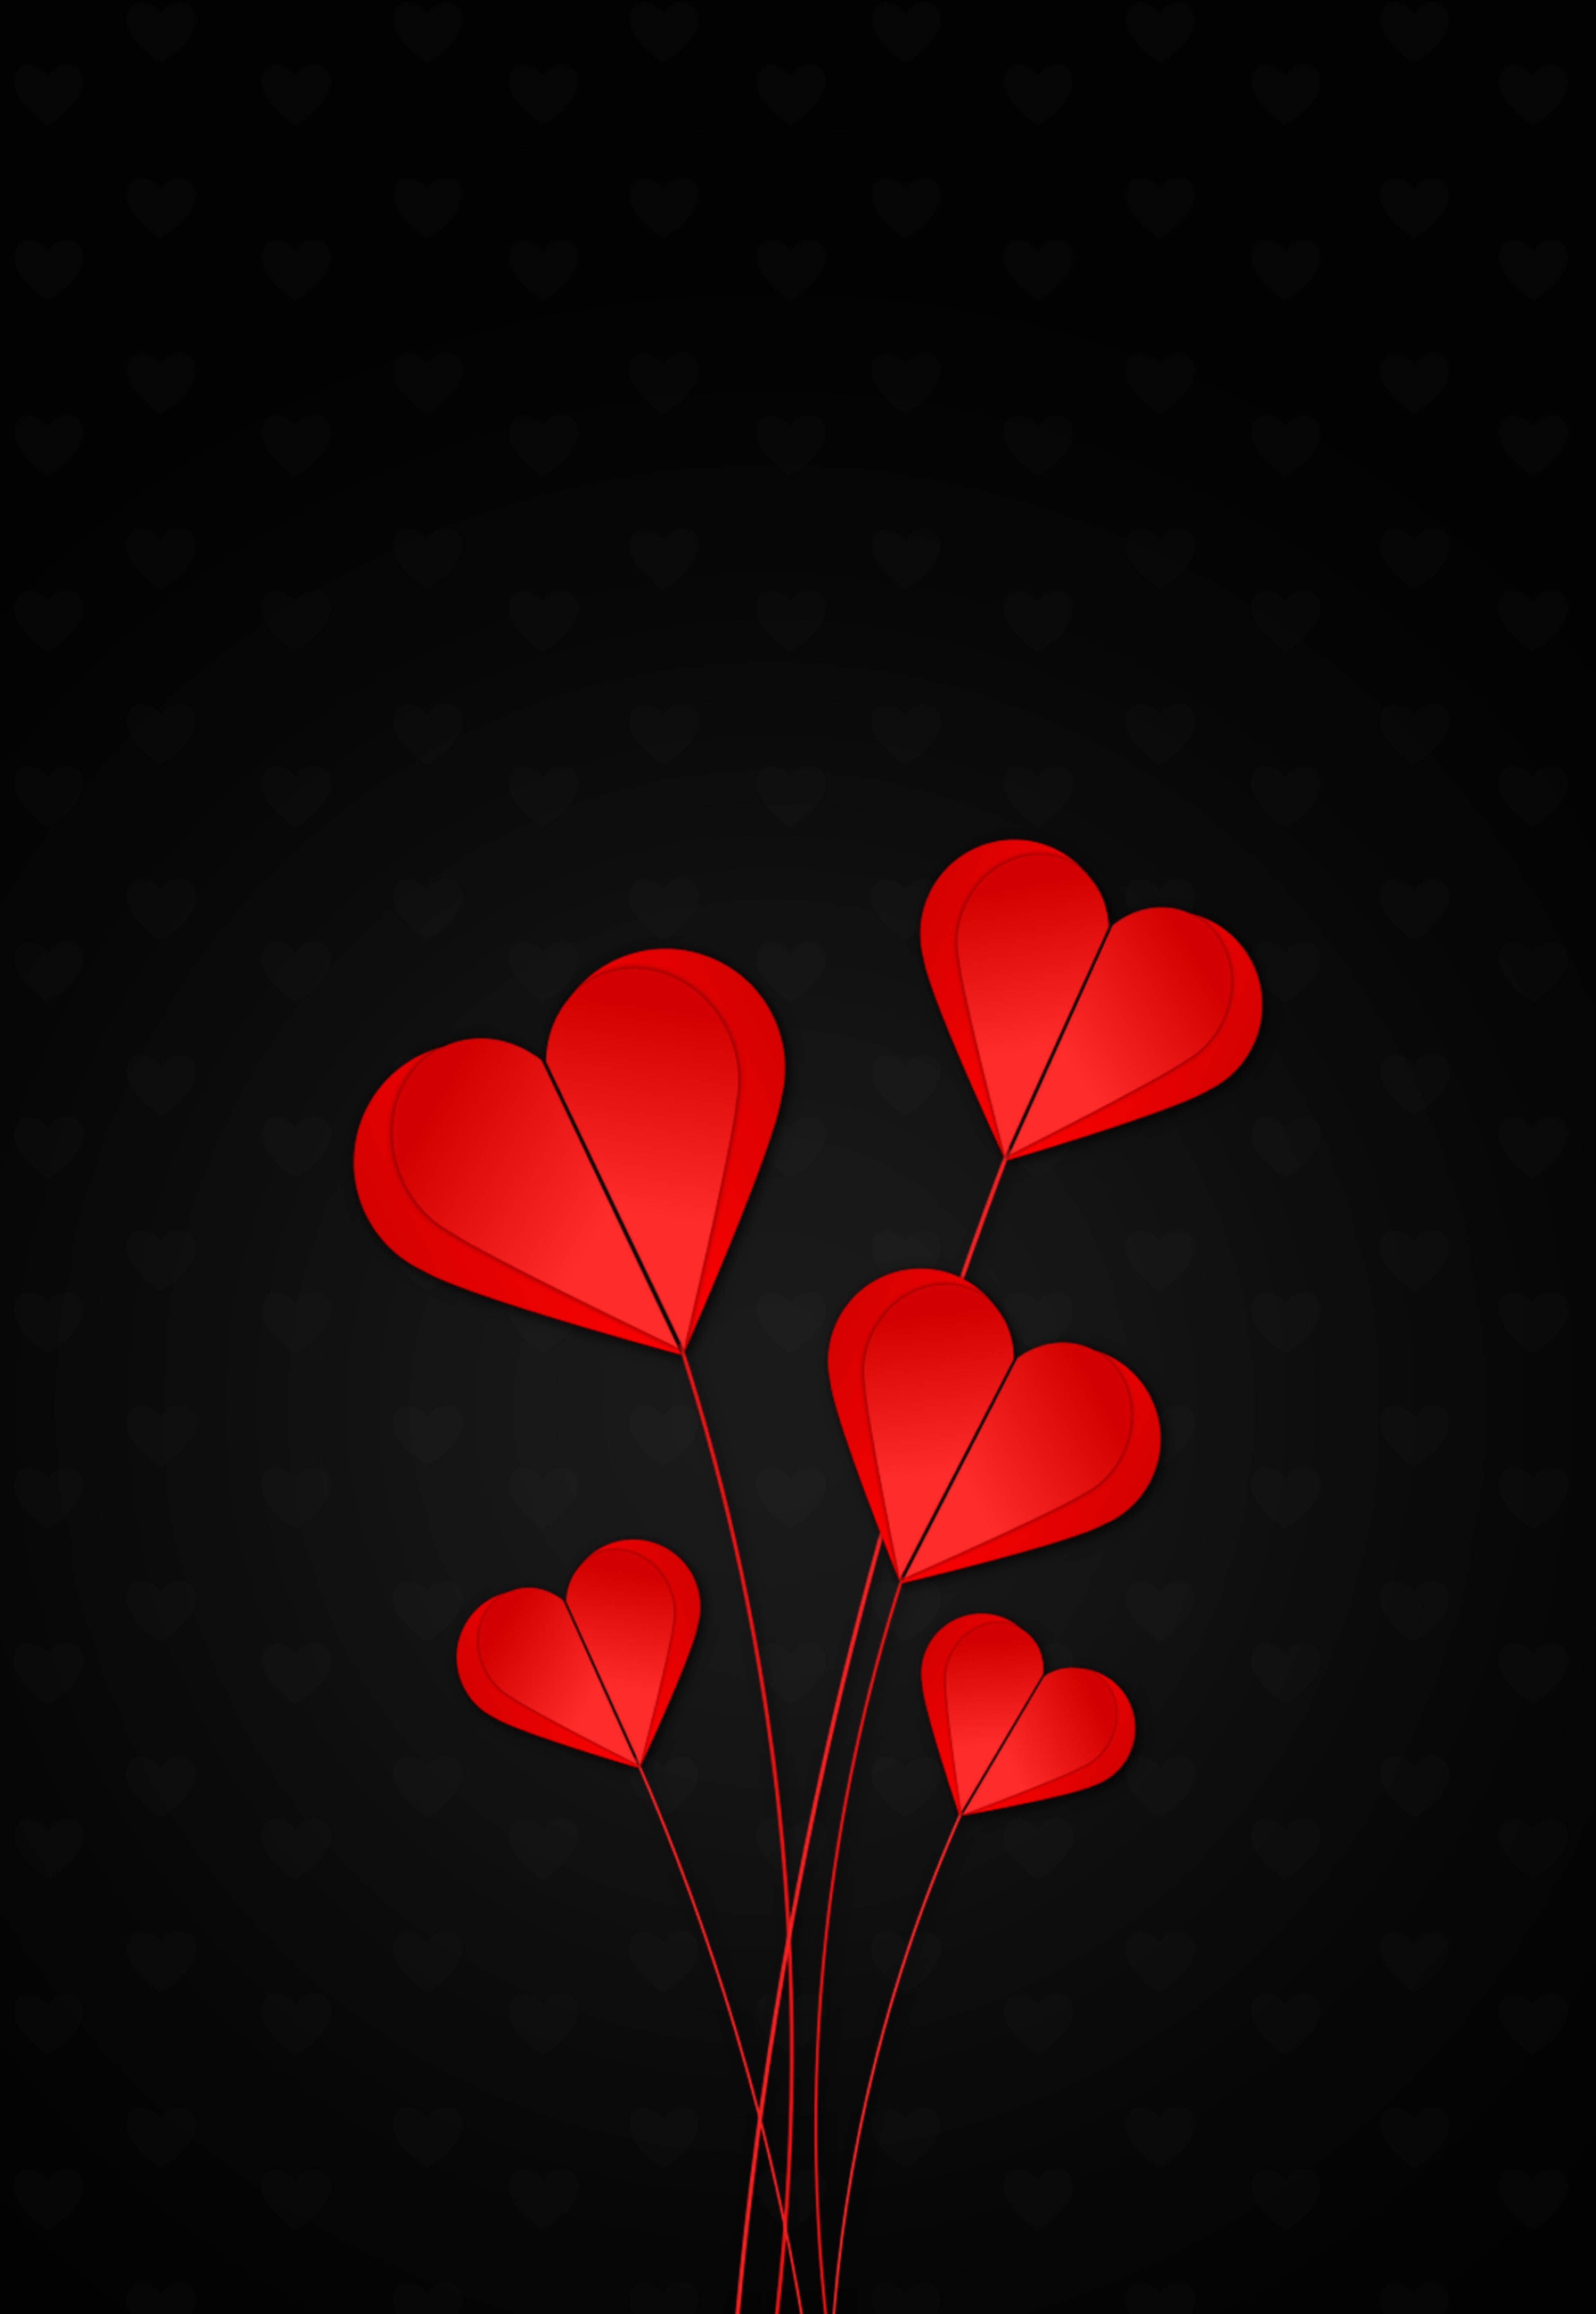 Free HD hearts, black background, love, red